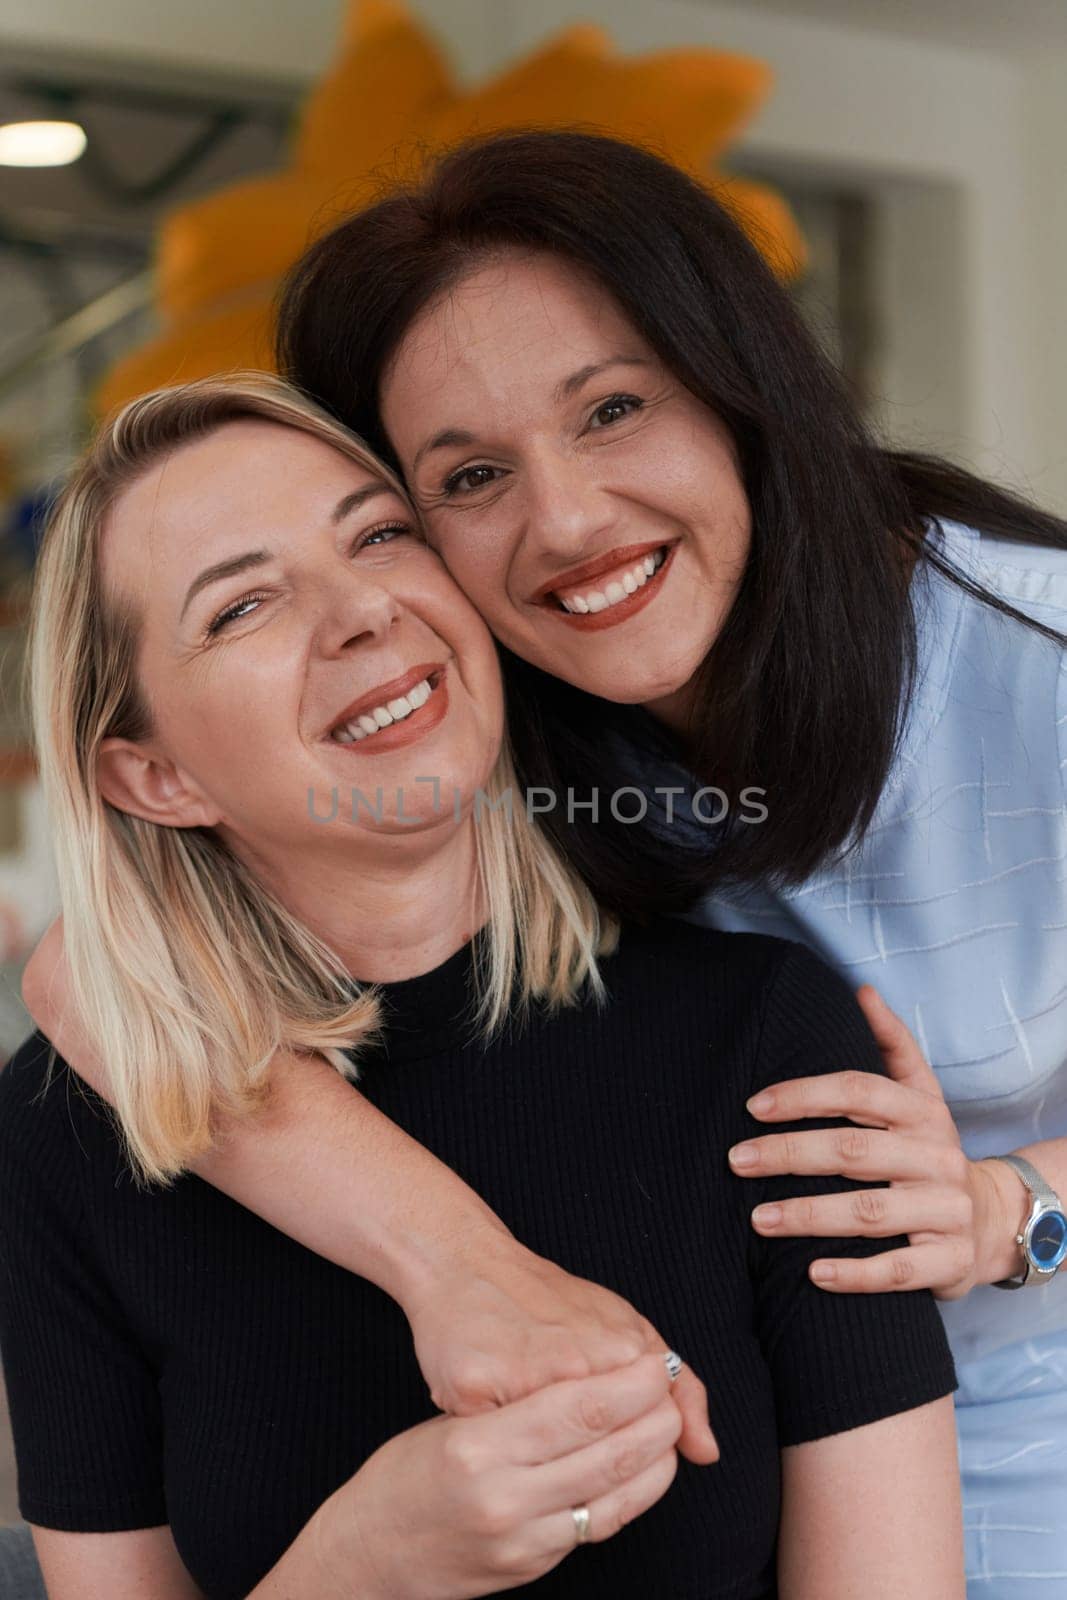 Two women share a heartfelt embrace while at a preschool, showcasing the nurturing and supportive environment for learning and growth by dotshock